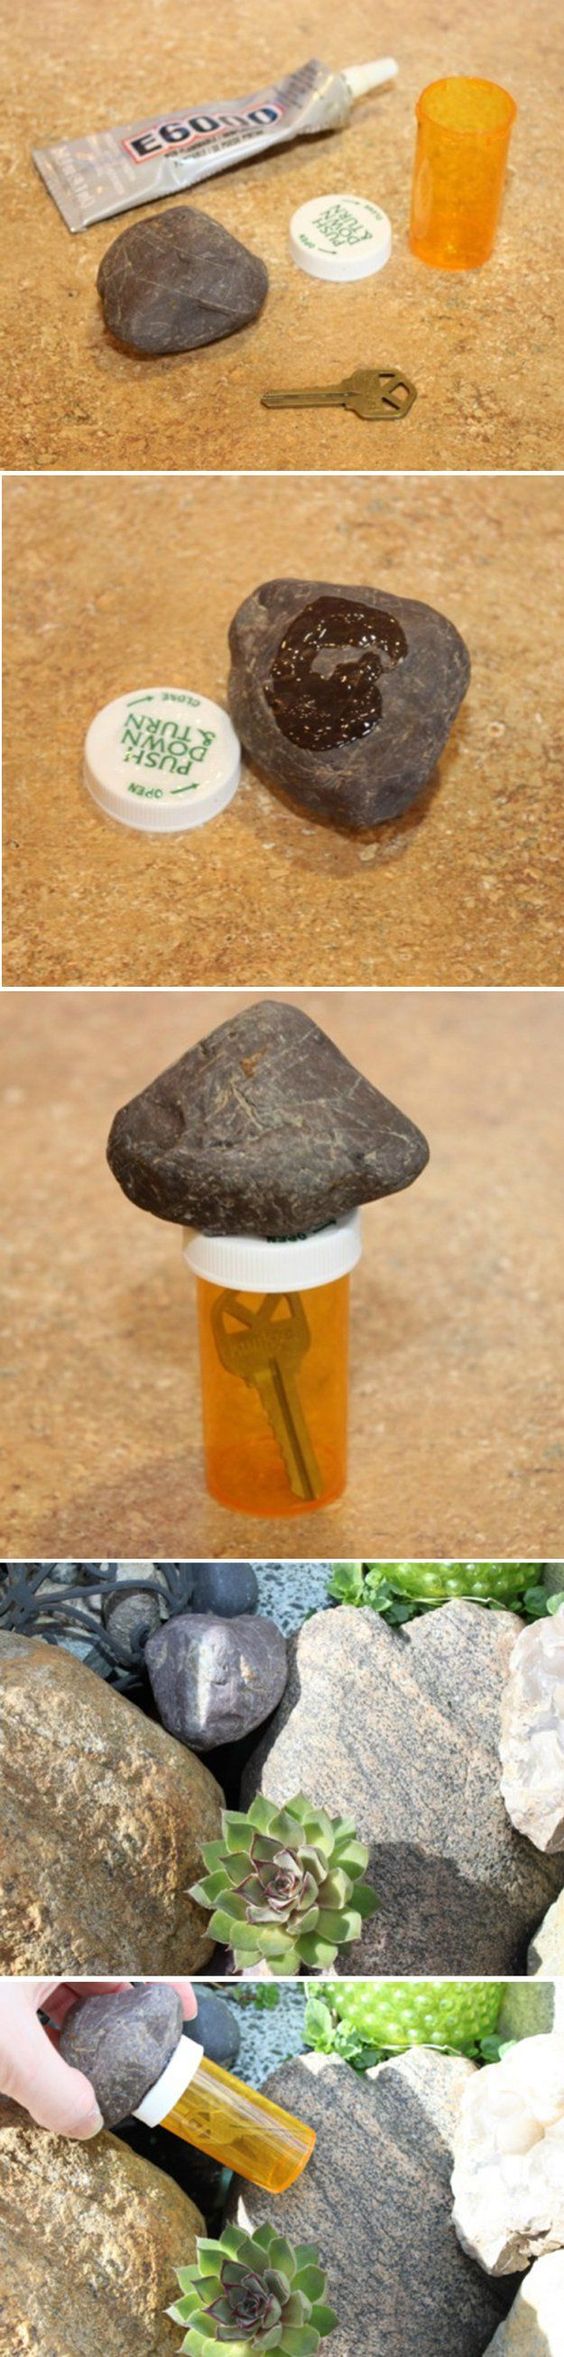 15 Awesome DIY Uses for Pill Bottles